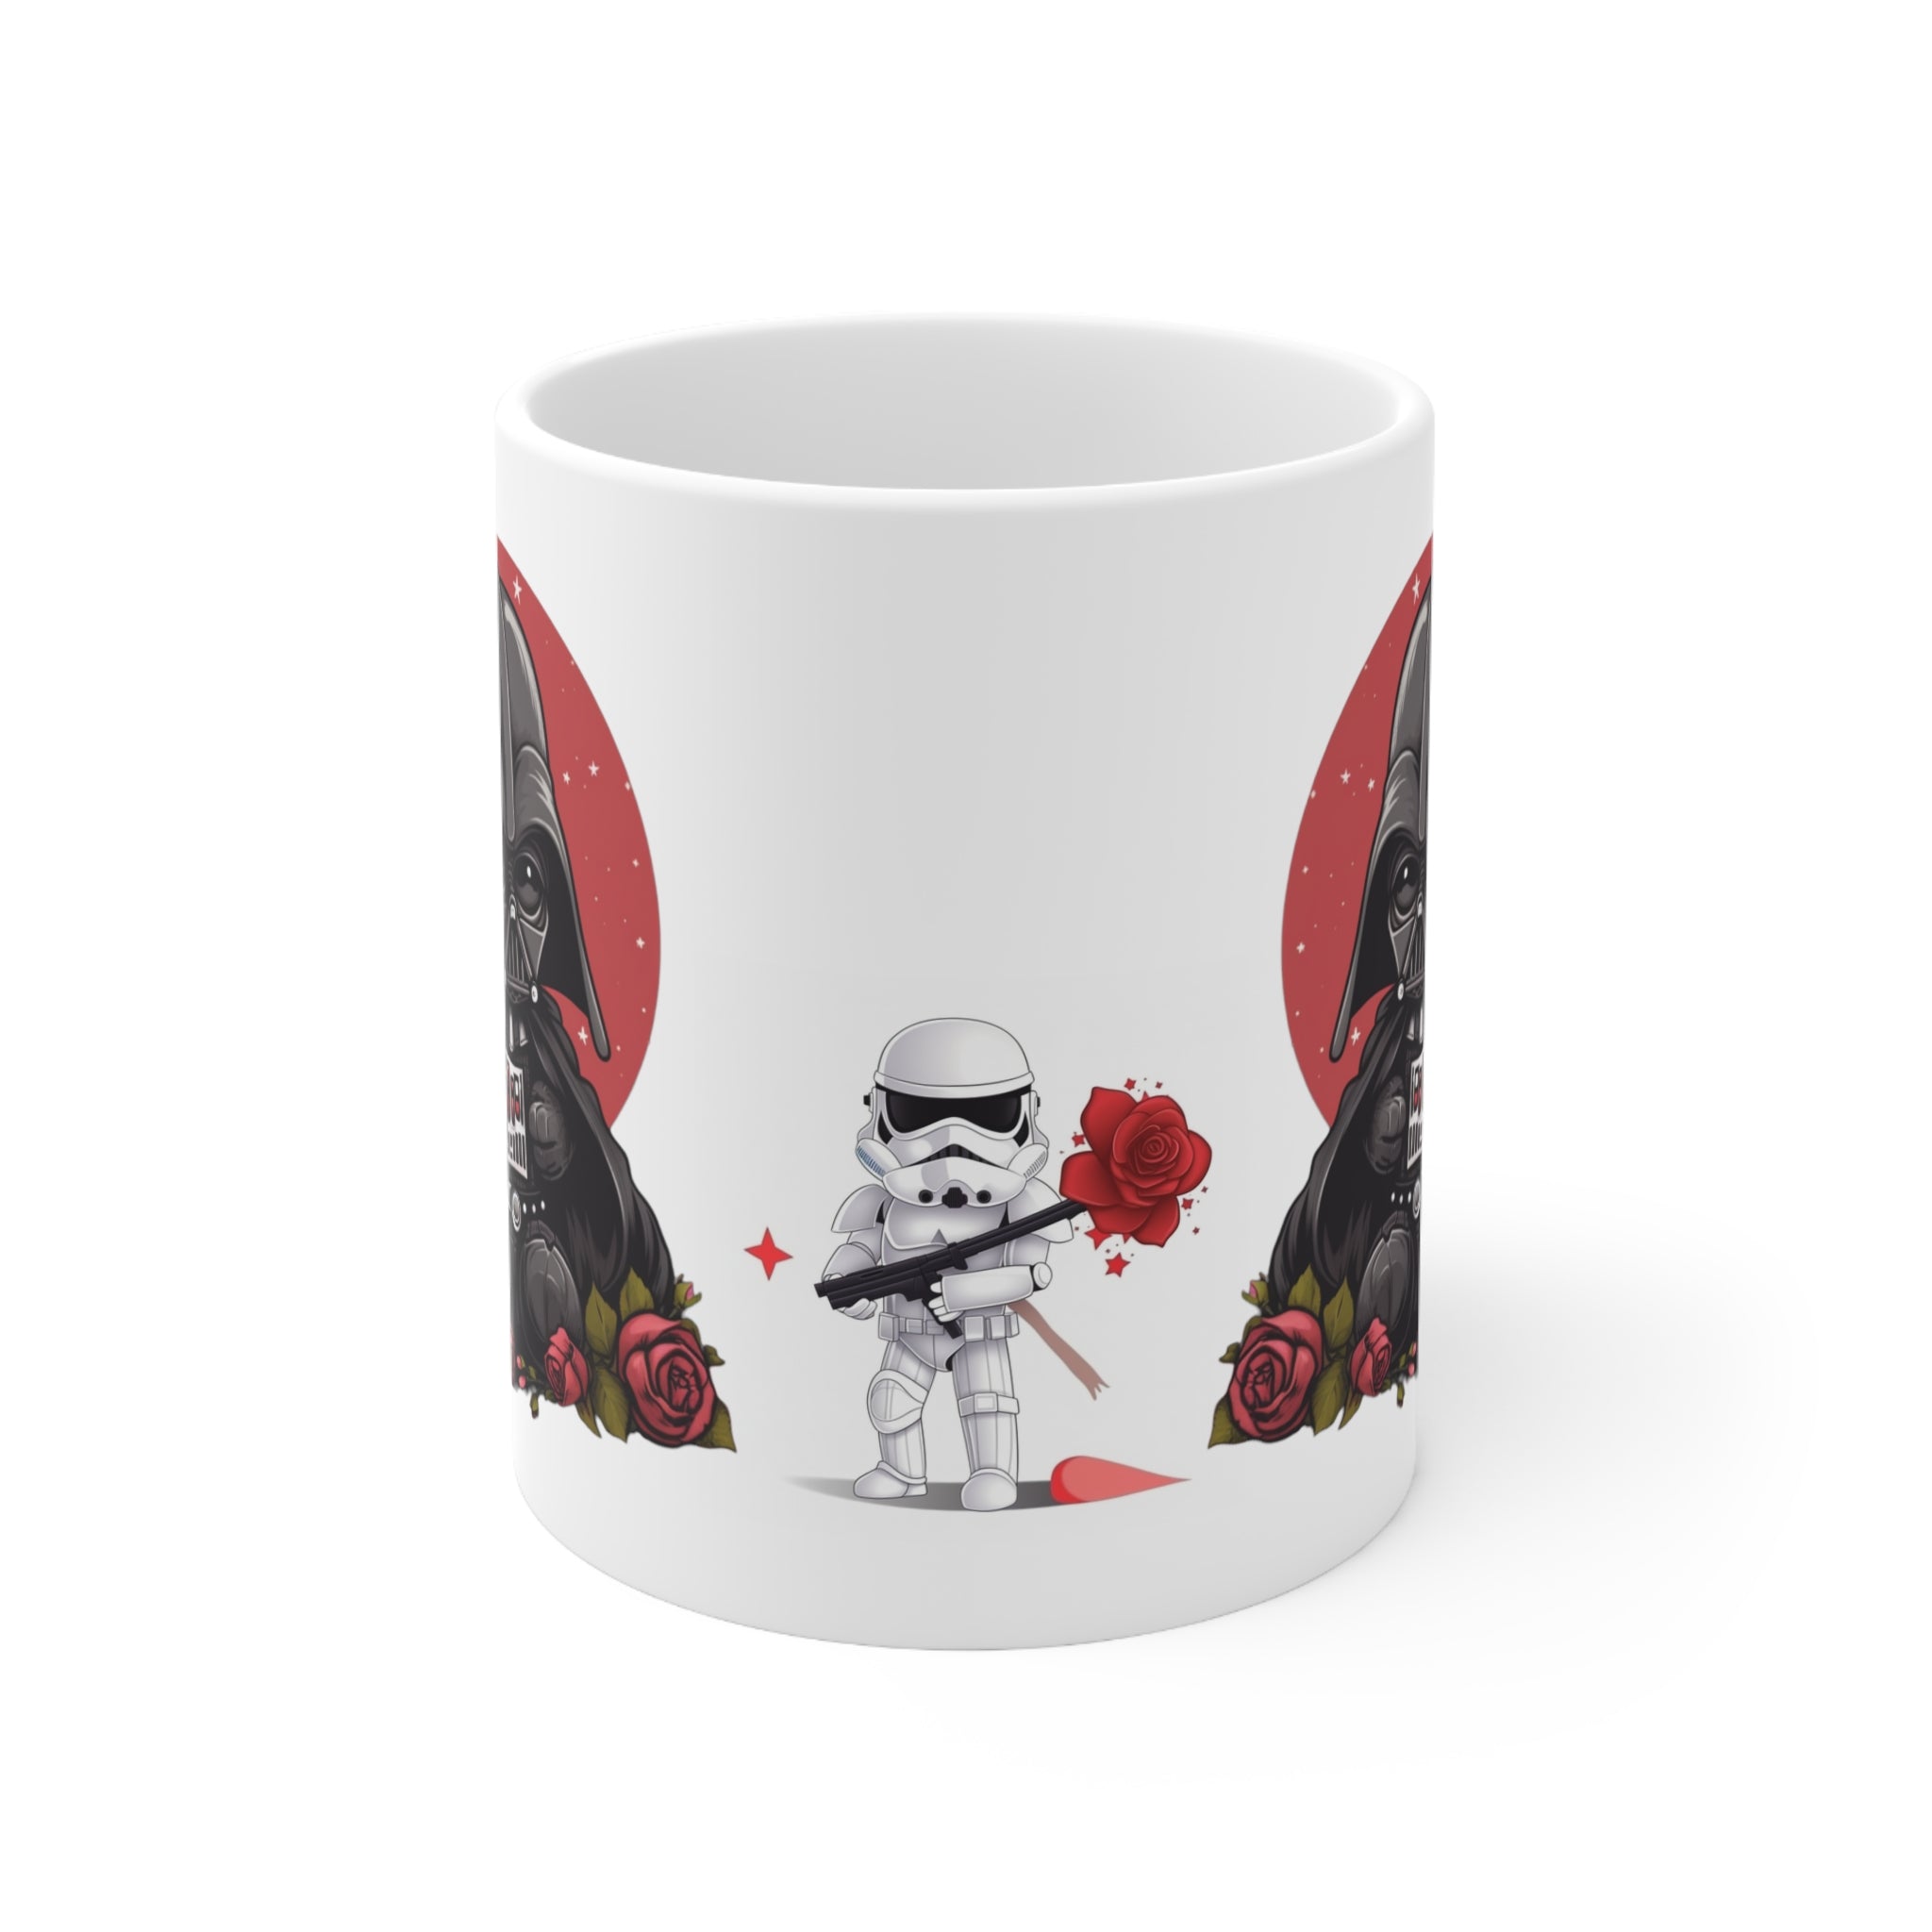 For Fans of the Original Trilogy! Add to your Collection . Classic Galaxy Villain Romantic Valentine's Day Cupid Ceramic Mug 11oz - Unique Gift for the One You Love or for the Ideal Gift for Friends